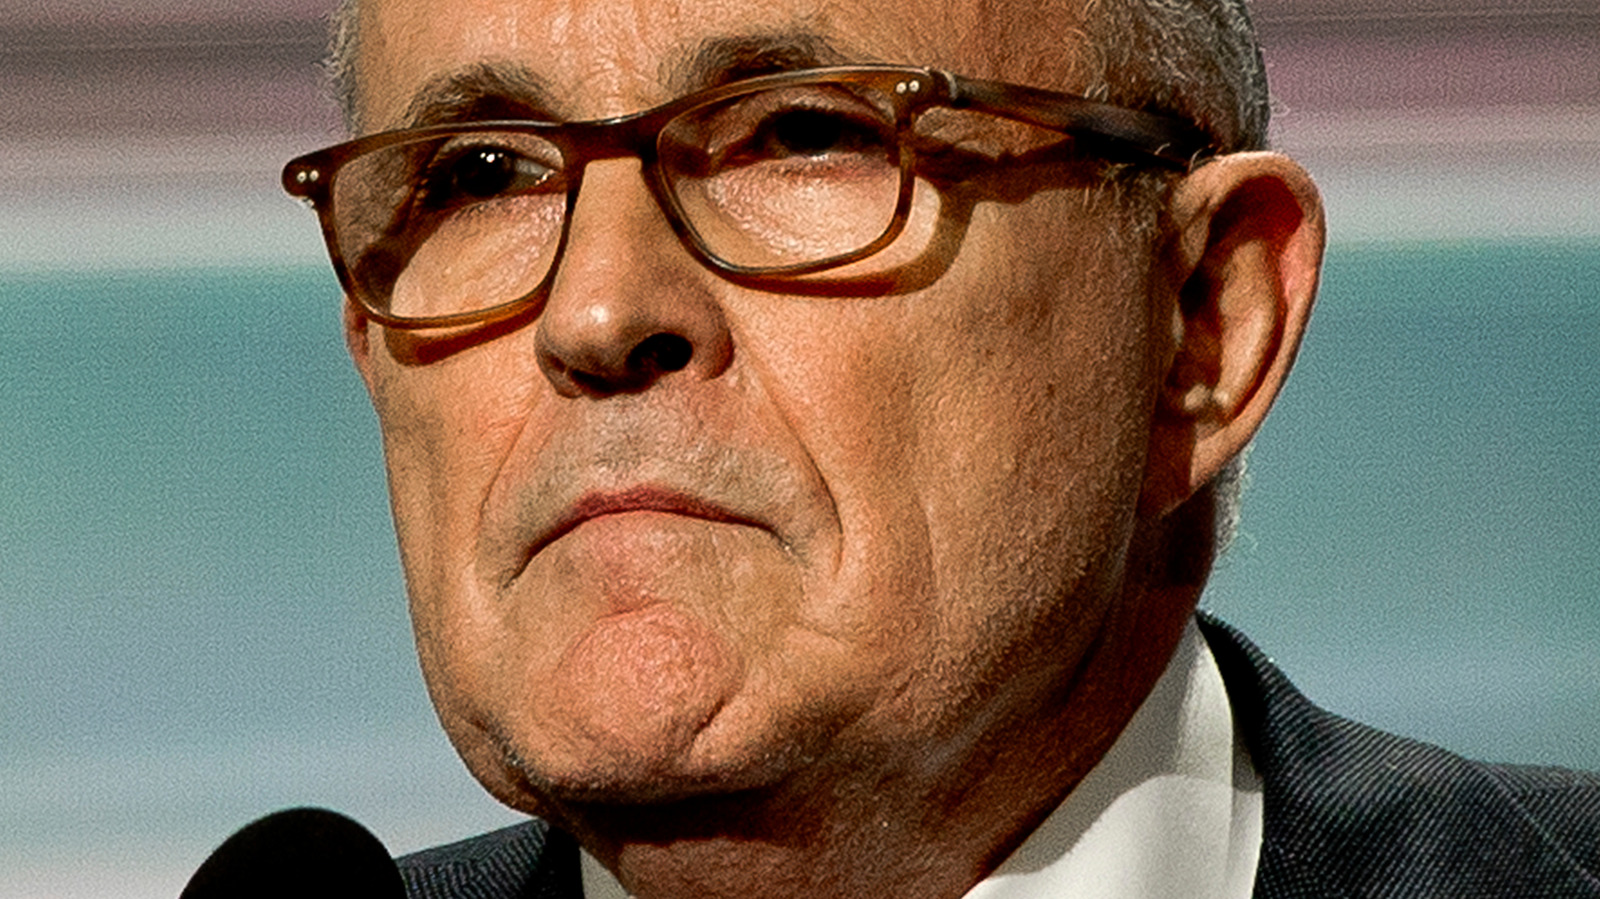 The Real Reason Rudy Giuliani Was Banned From Fox News